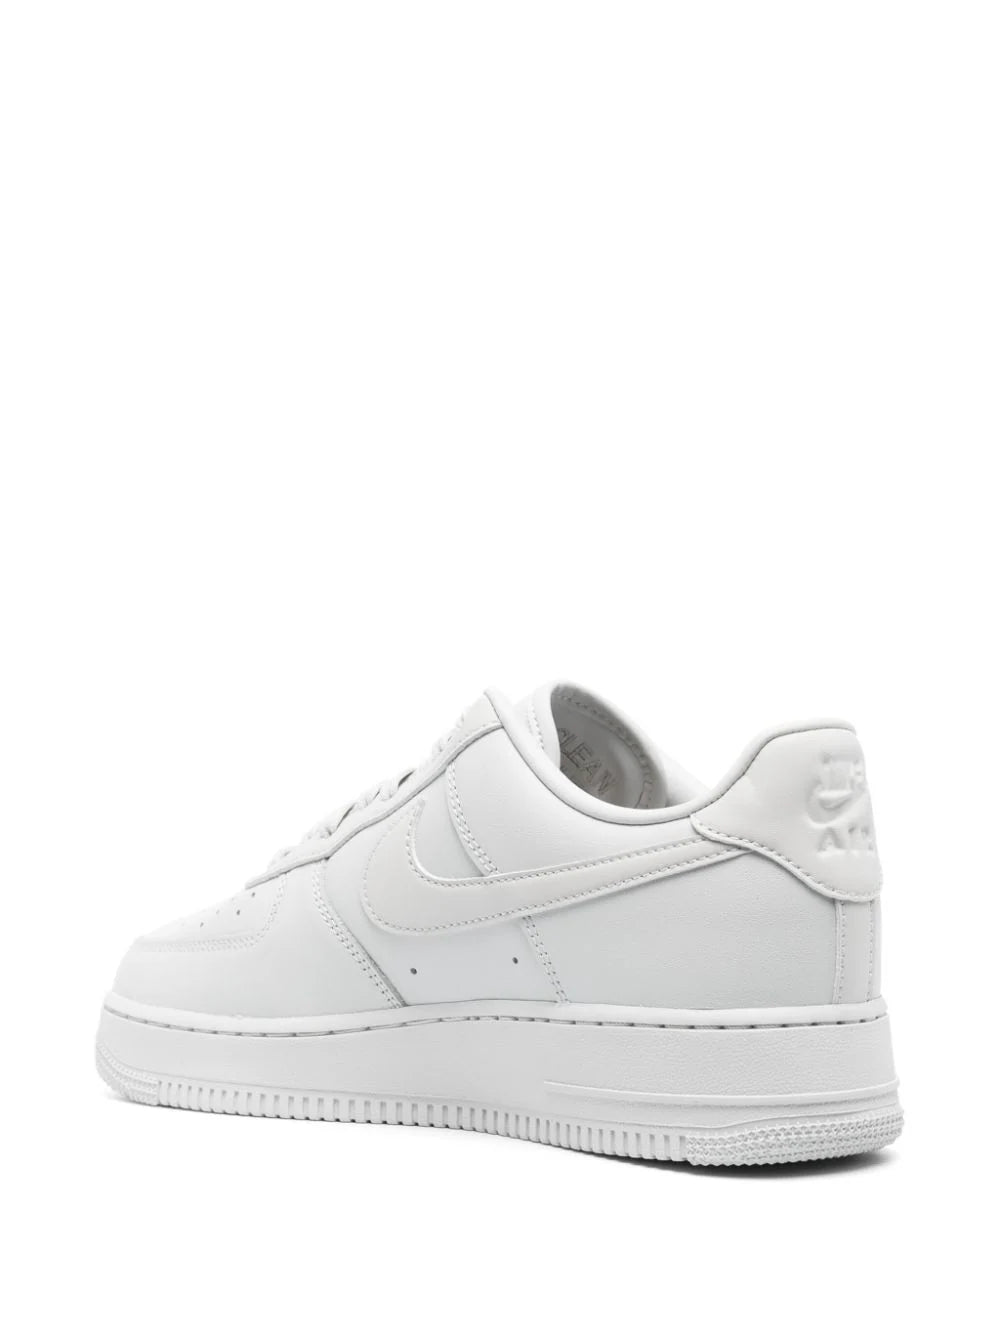 Shoellist | Nike Air Force 1 leather sneakers "White"